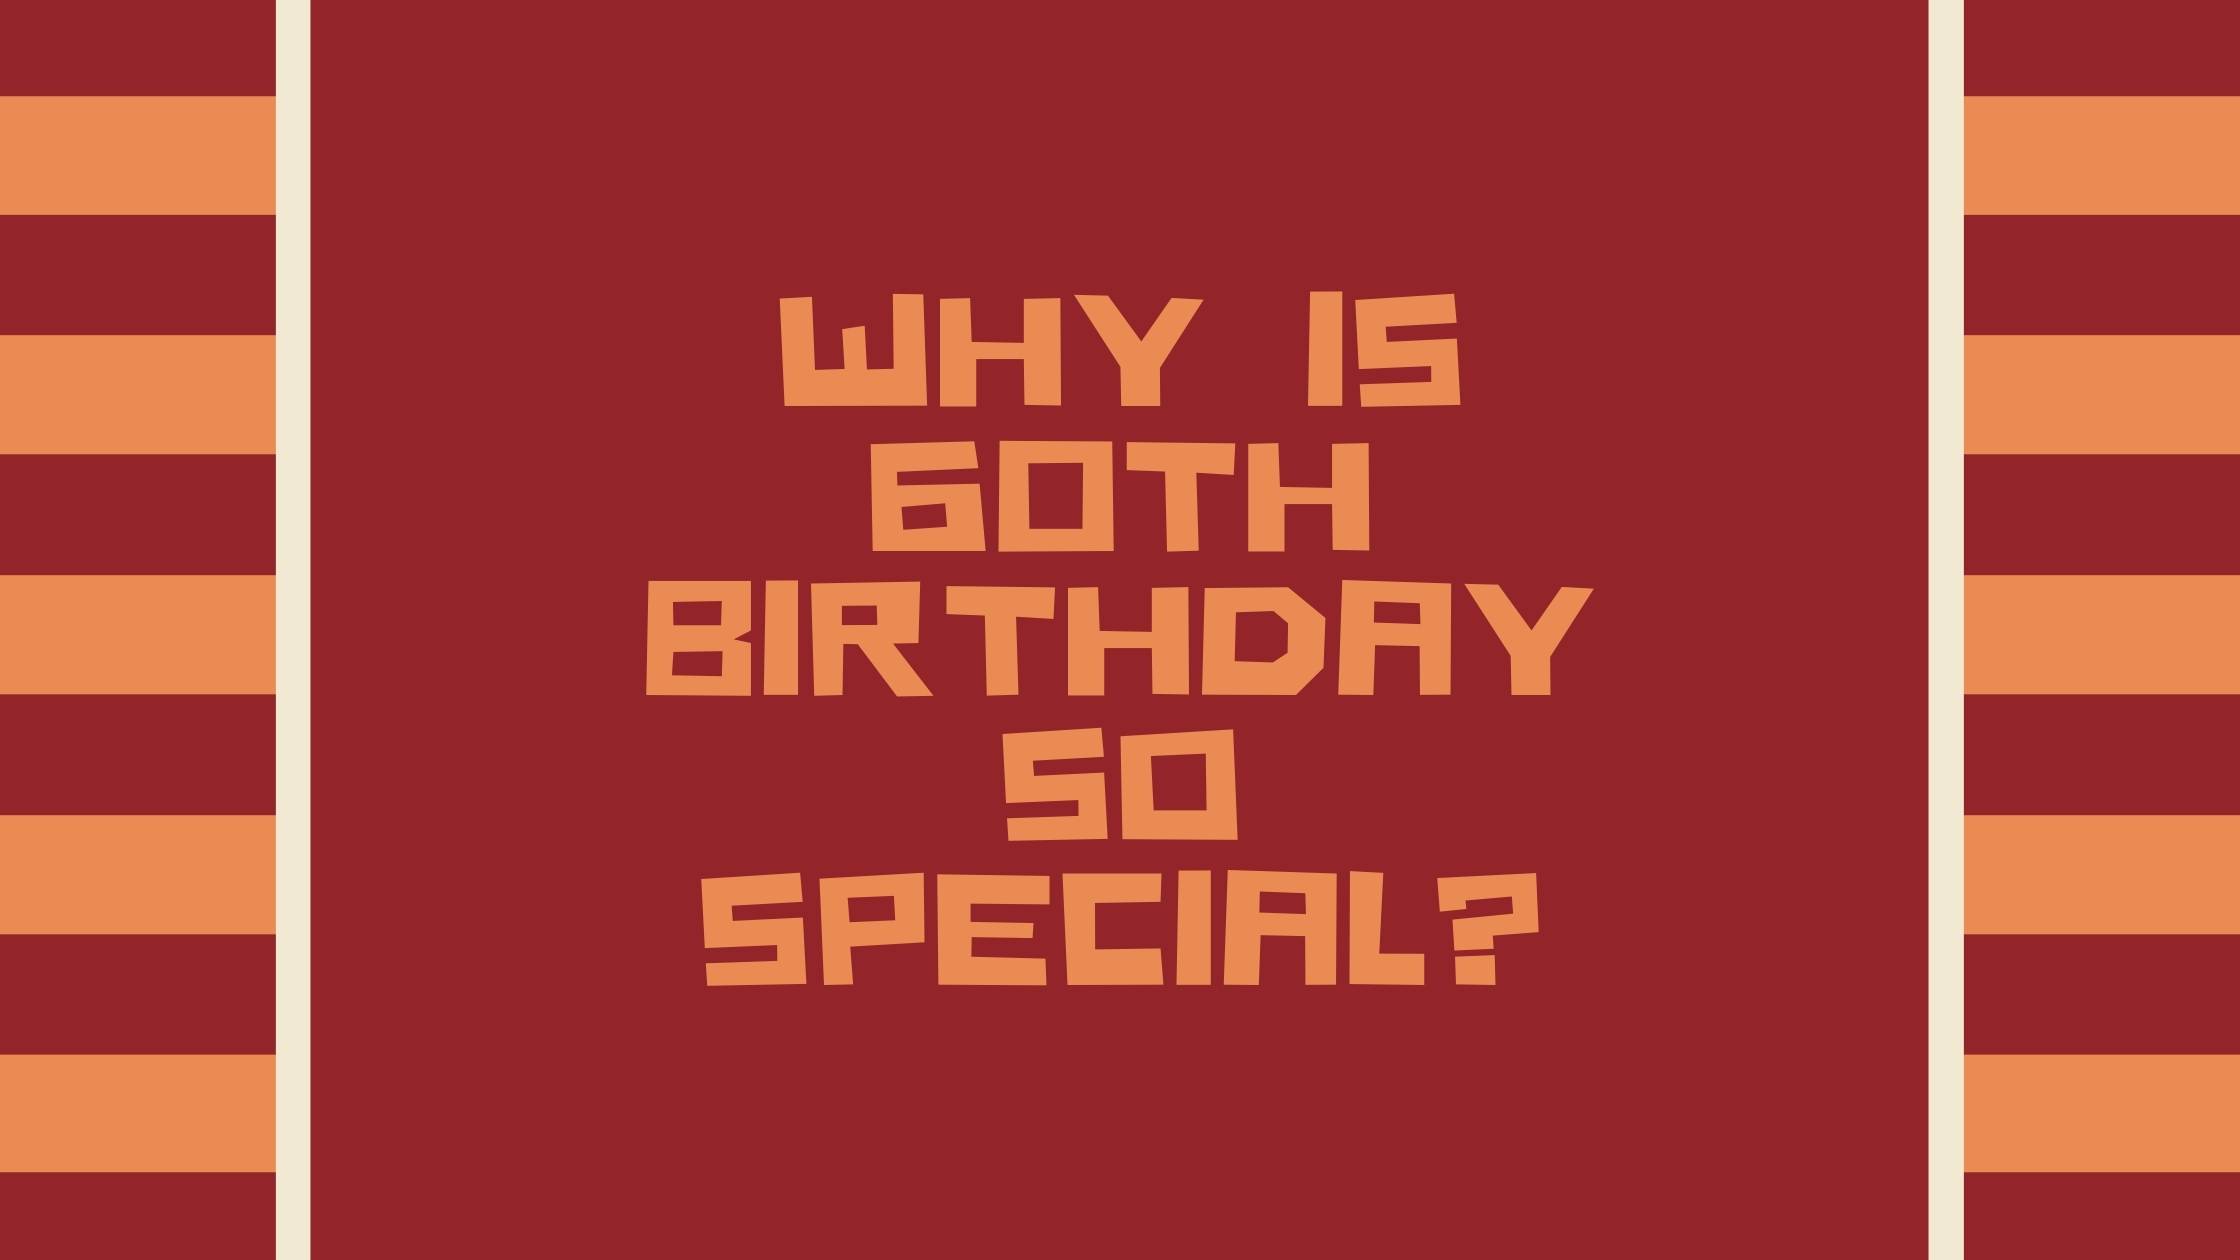 public/uploads/2021/11/Why-is-60th-Birthday-so-Special.jpg